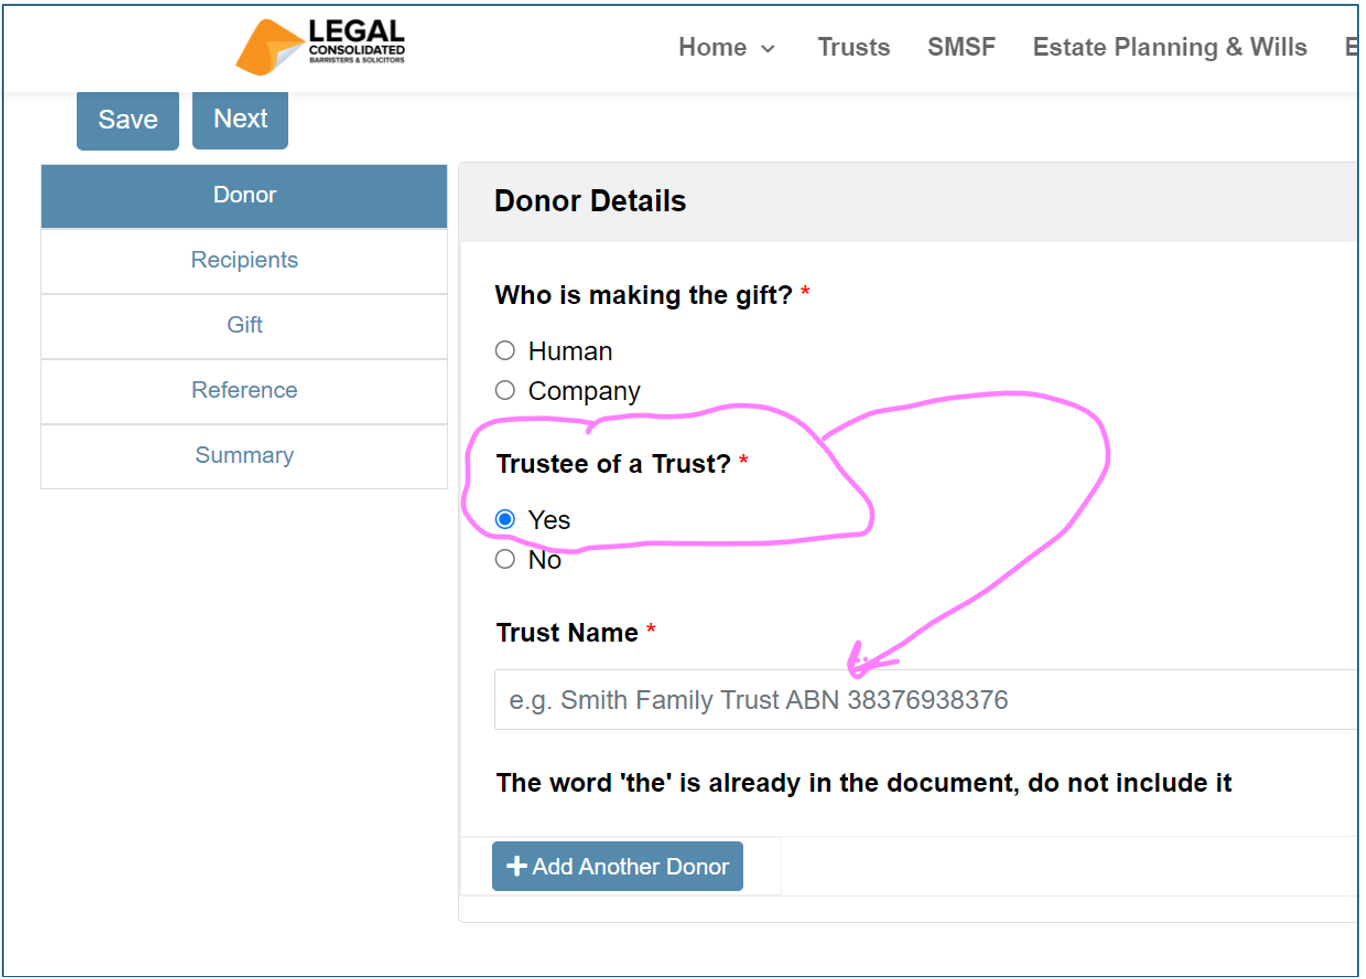 A Trust makes a gift through its Trustee